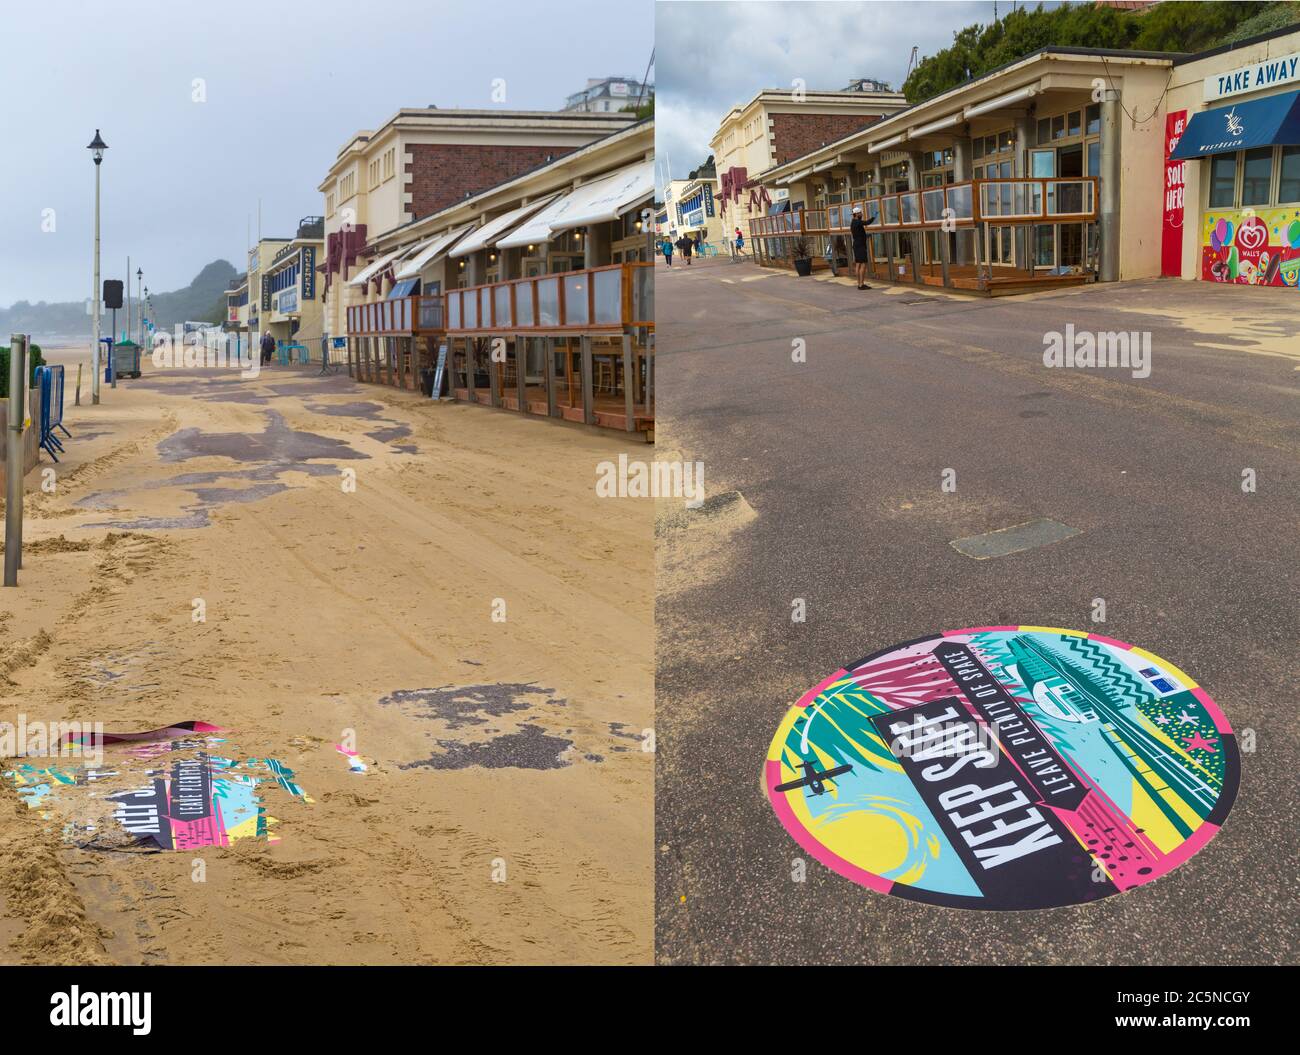 Bournemouth, Dorset UK. 4th July 2020. UK weather: windy, drizzly and murky at Bournemouth beaches as very few people visit the seaside, apart from surfers and kite surfers, so can adhere to social distancing measures. This composite shows the amount of sand blown up on the promenade (left) since yesterday (right) with the new sign reminding visitors to keep safe and leave plenty of space ravaged by the weather and barely visible. Credit: Carolyn Jenkins/Alamy Live News Stock Photo